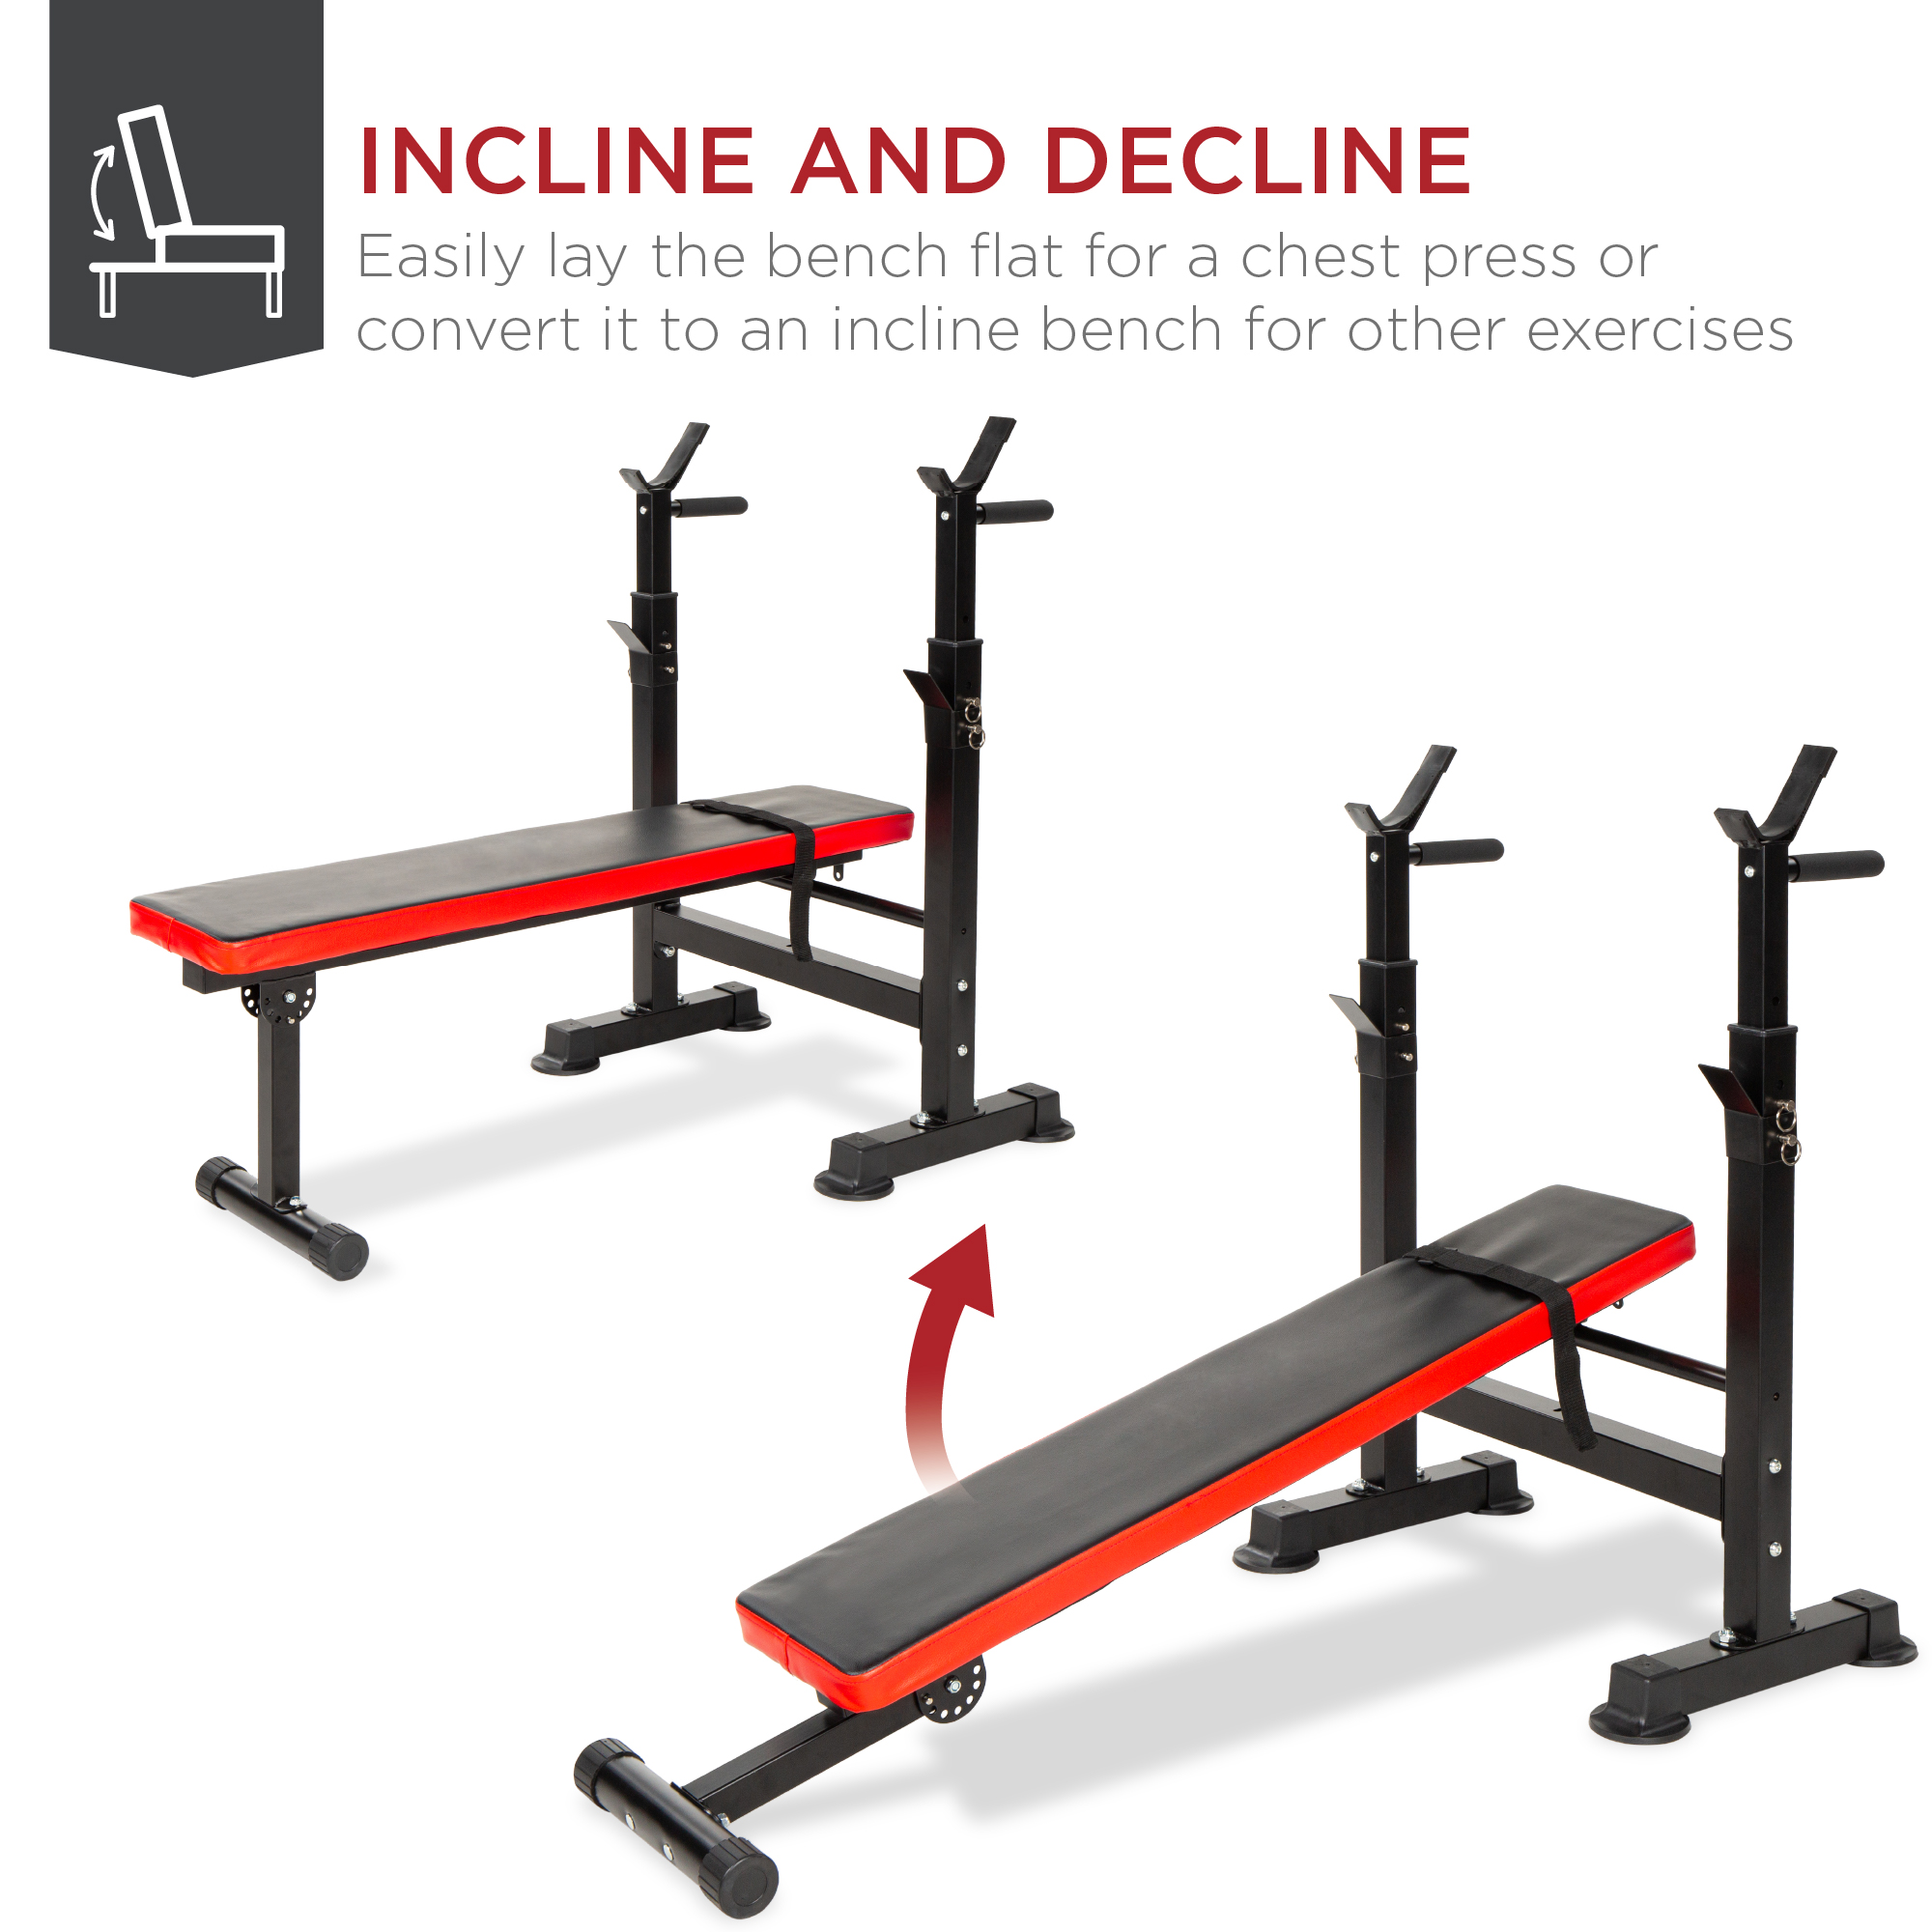 Best Choice Products Adjustable Folding Fitness Barbell Rack & Weight Bench for Home Gym, Strength Training - Black/Red - image 4 of 6